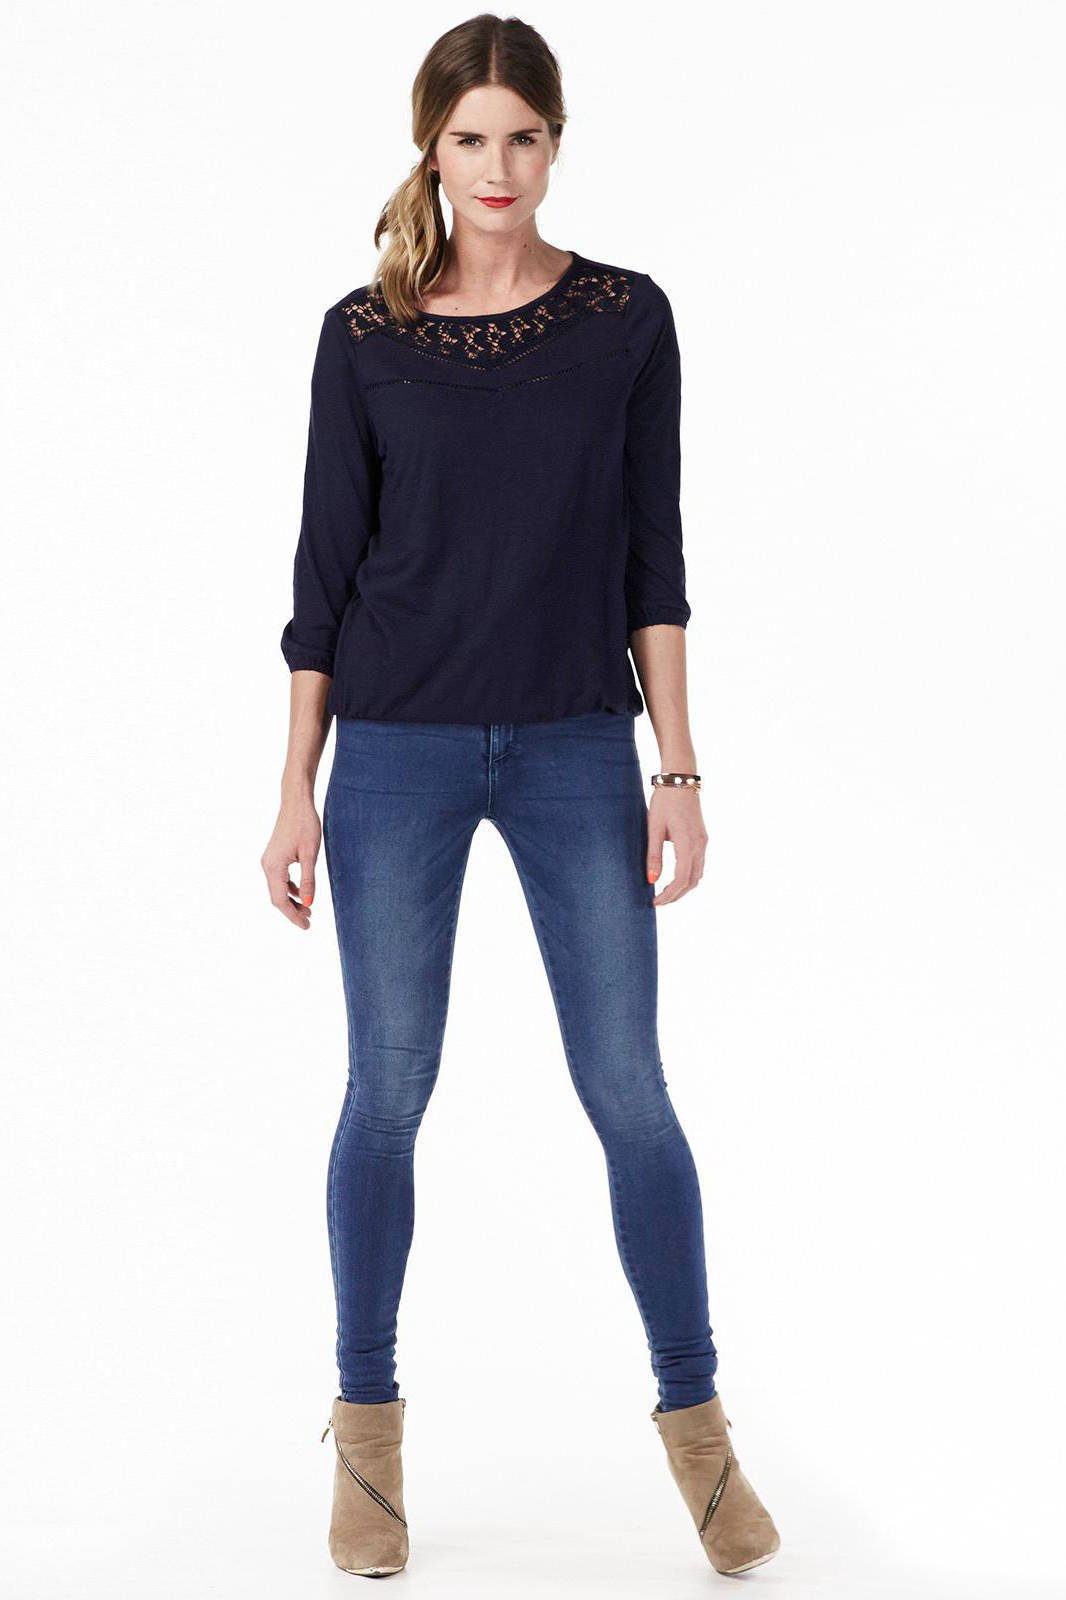 only royal high skinny jeans blue